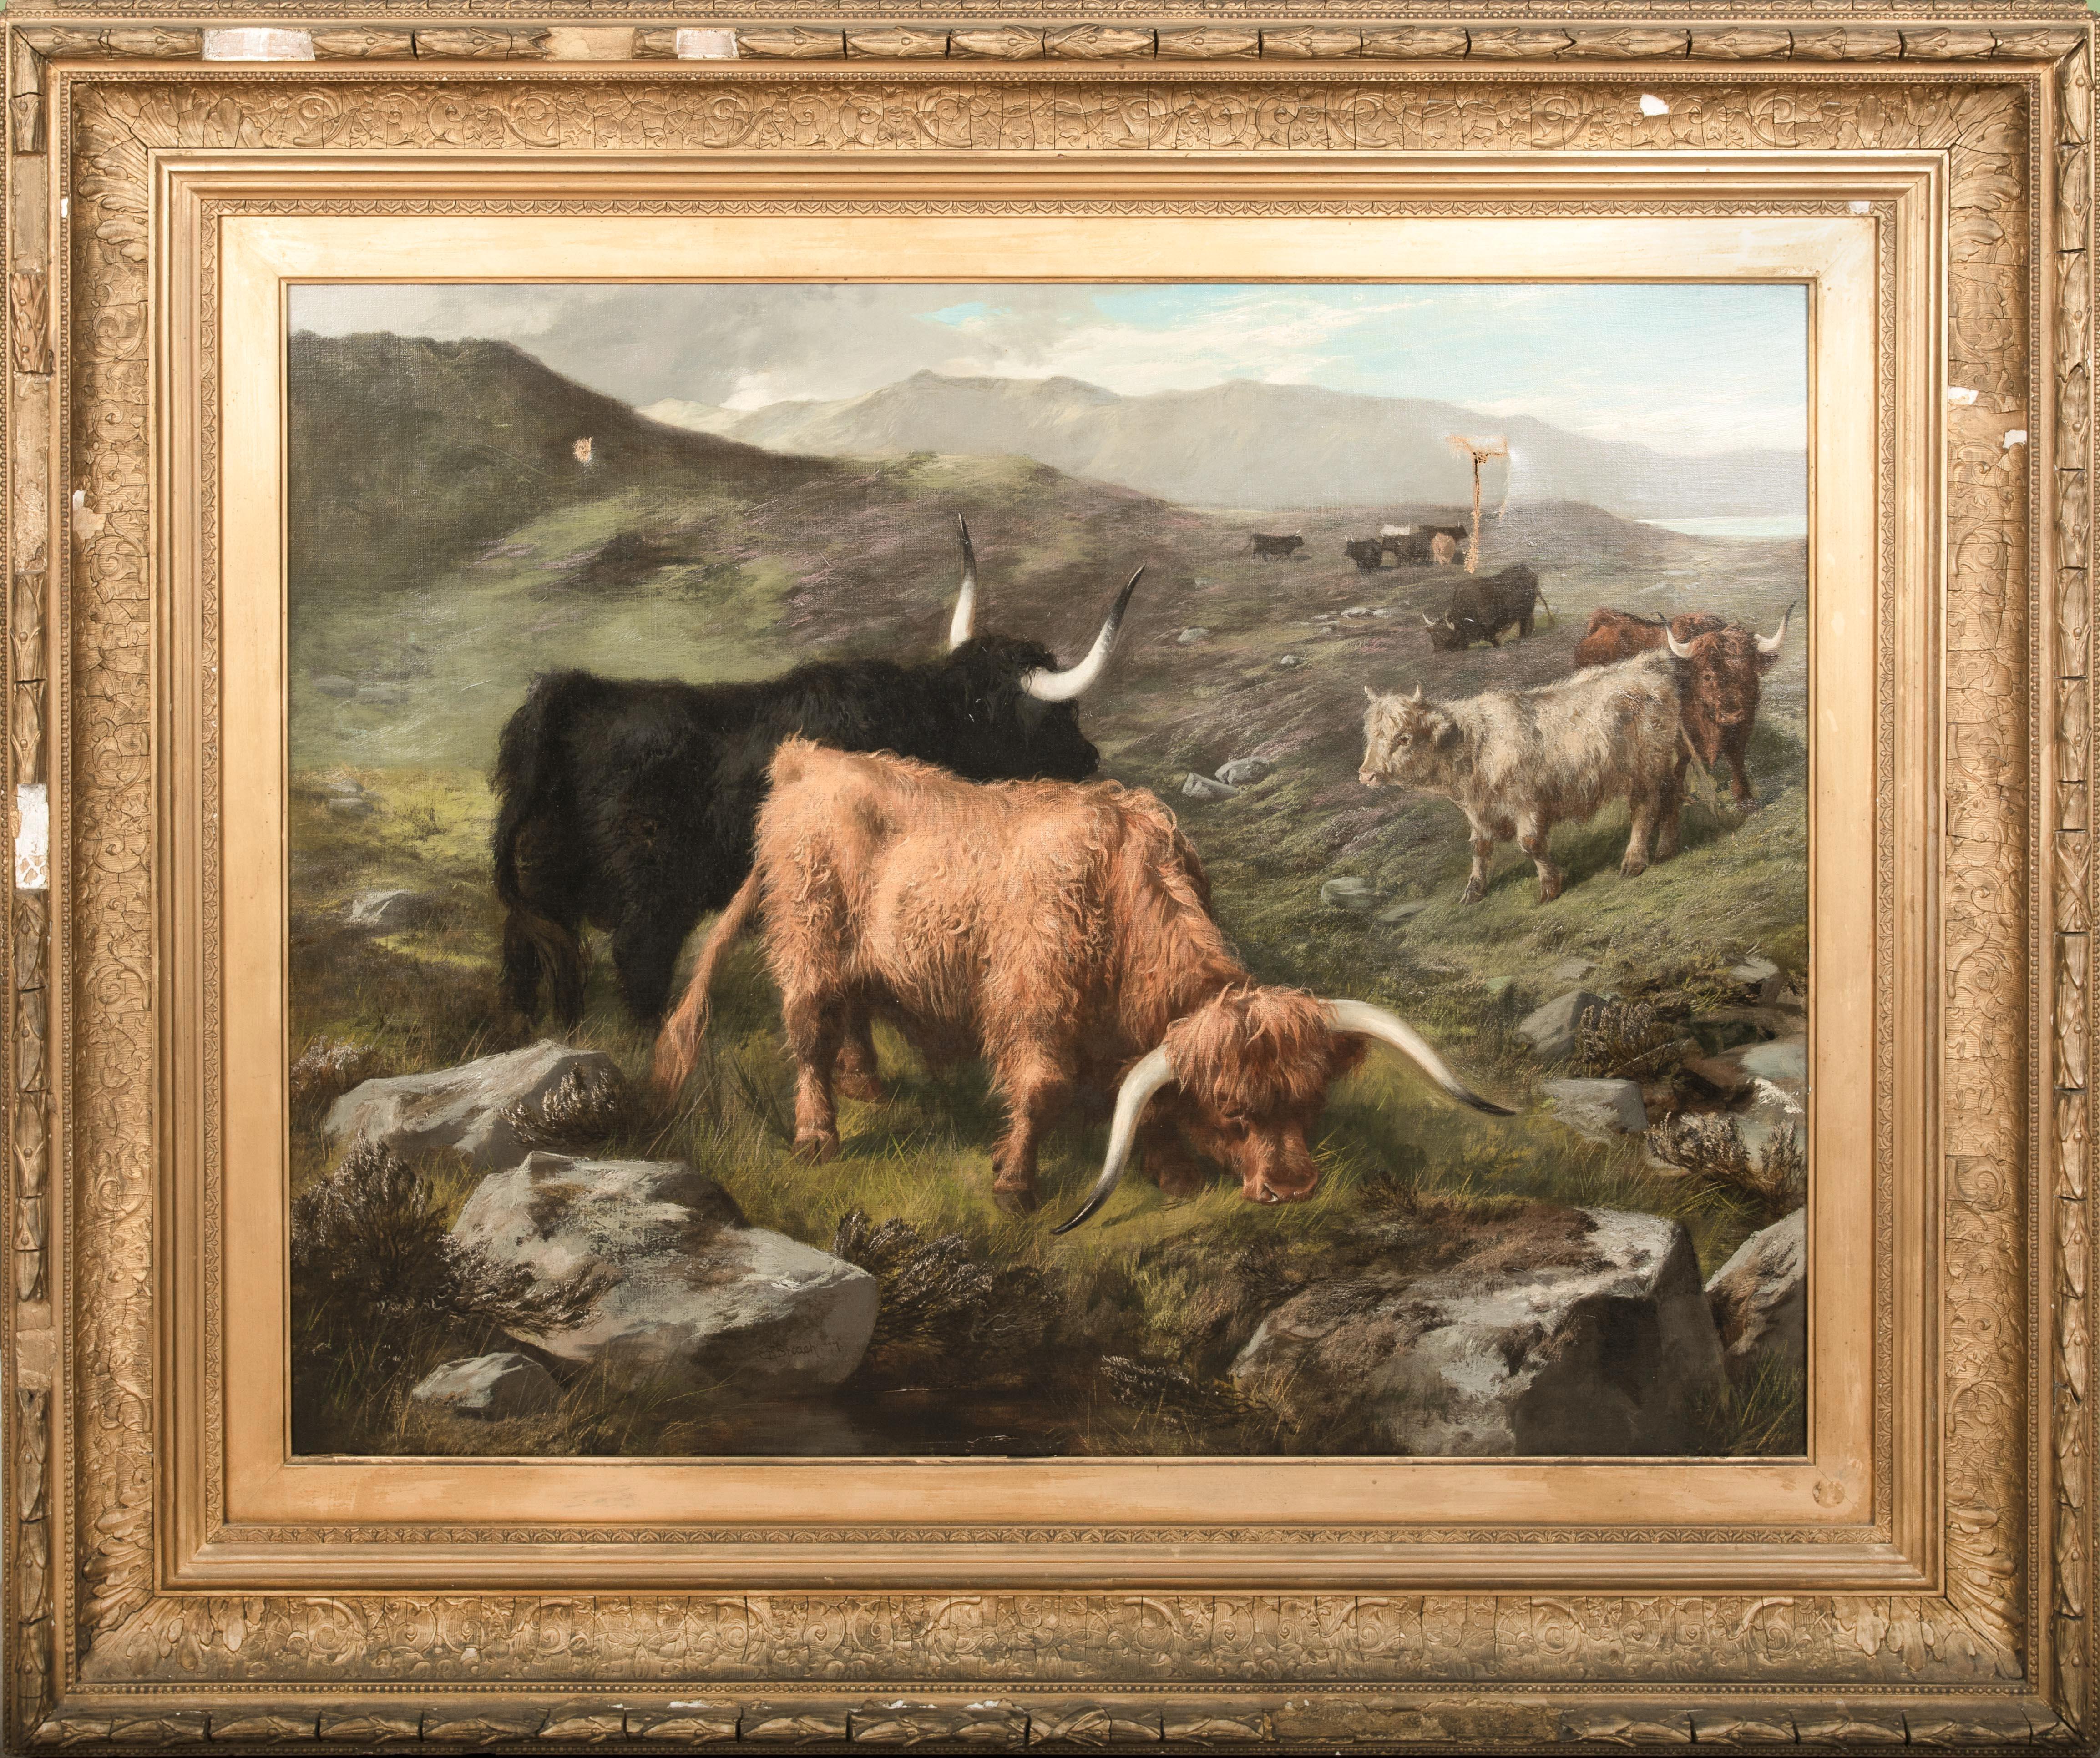 Unknown Animal Painting - Highland Cattle, 19th Century  by E R Breach (19th Century, Scottish)  